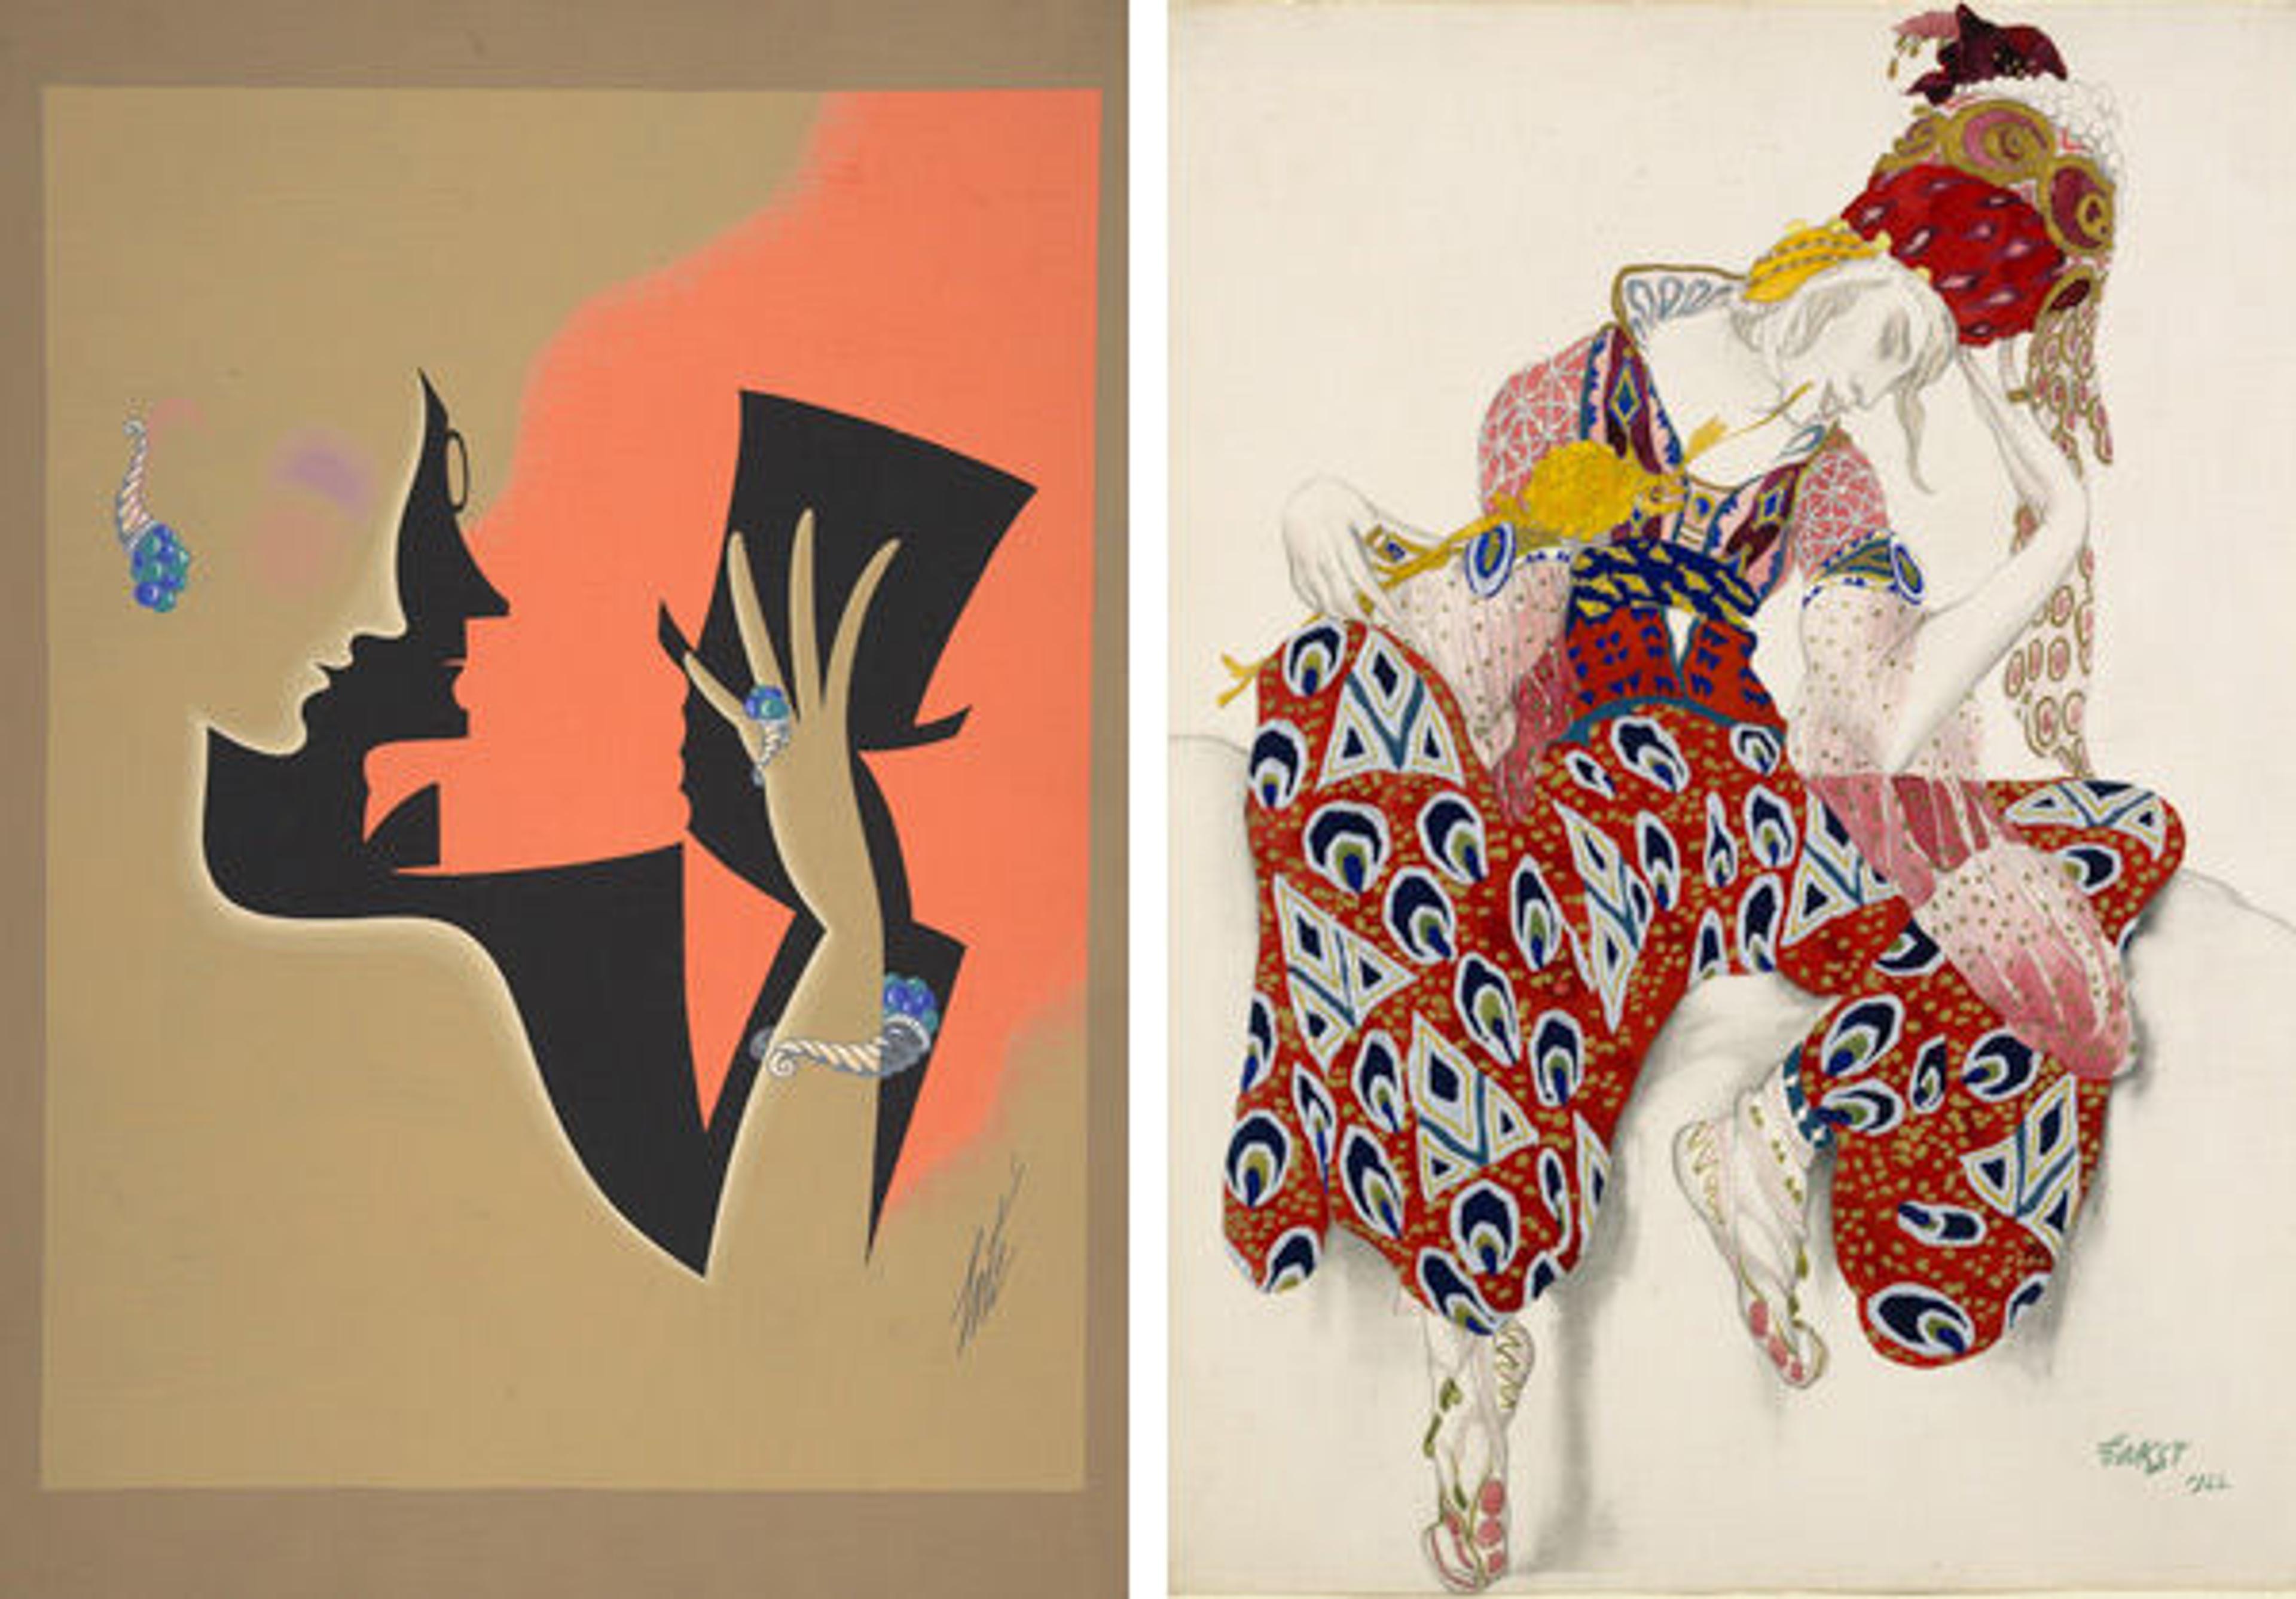 Left: Fig. 6. Erté (Romain de Tirtoff) (French [born Russia], 1892–1990). Shadow, ca. 1930. The Metropolitan Museum of Art, New York, Purchase, The Martin Foundation Inc. Gift, 1967 (67.762.96). © 2015 Artists Rights Society (ARS), New York. Right: Fig. 7. Léon Bakst (Russian, 1866–1924). Costume Study for Nijinsky in the Role of Iksender in the Ballet La Péri, 1922. Watercolor and gold and silver paints over graphite; 26 5/8 x 19 1/4 in. (67.6 x 48.9 cm). The Metropolitan Museum of Art, New York, Gift of Sir Joseph Duveen, 1922 (22.226.1)